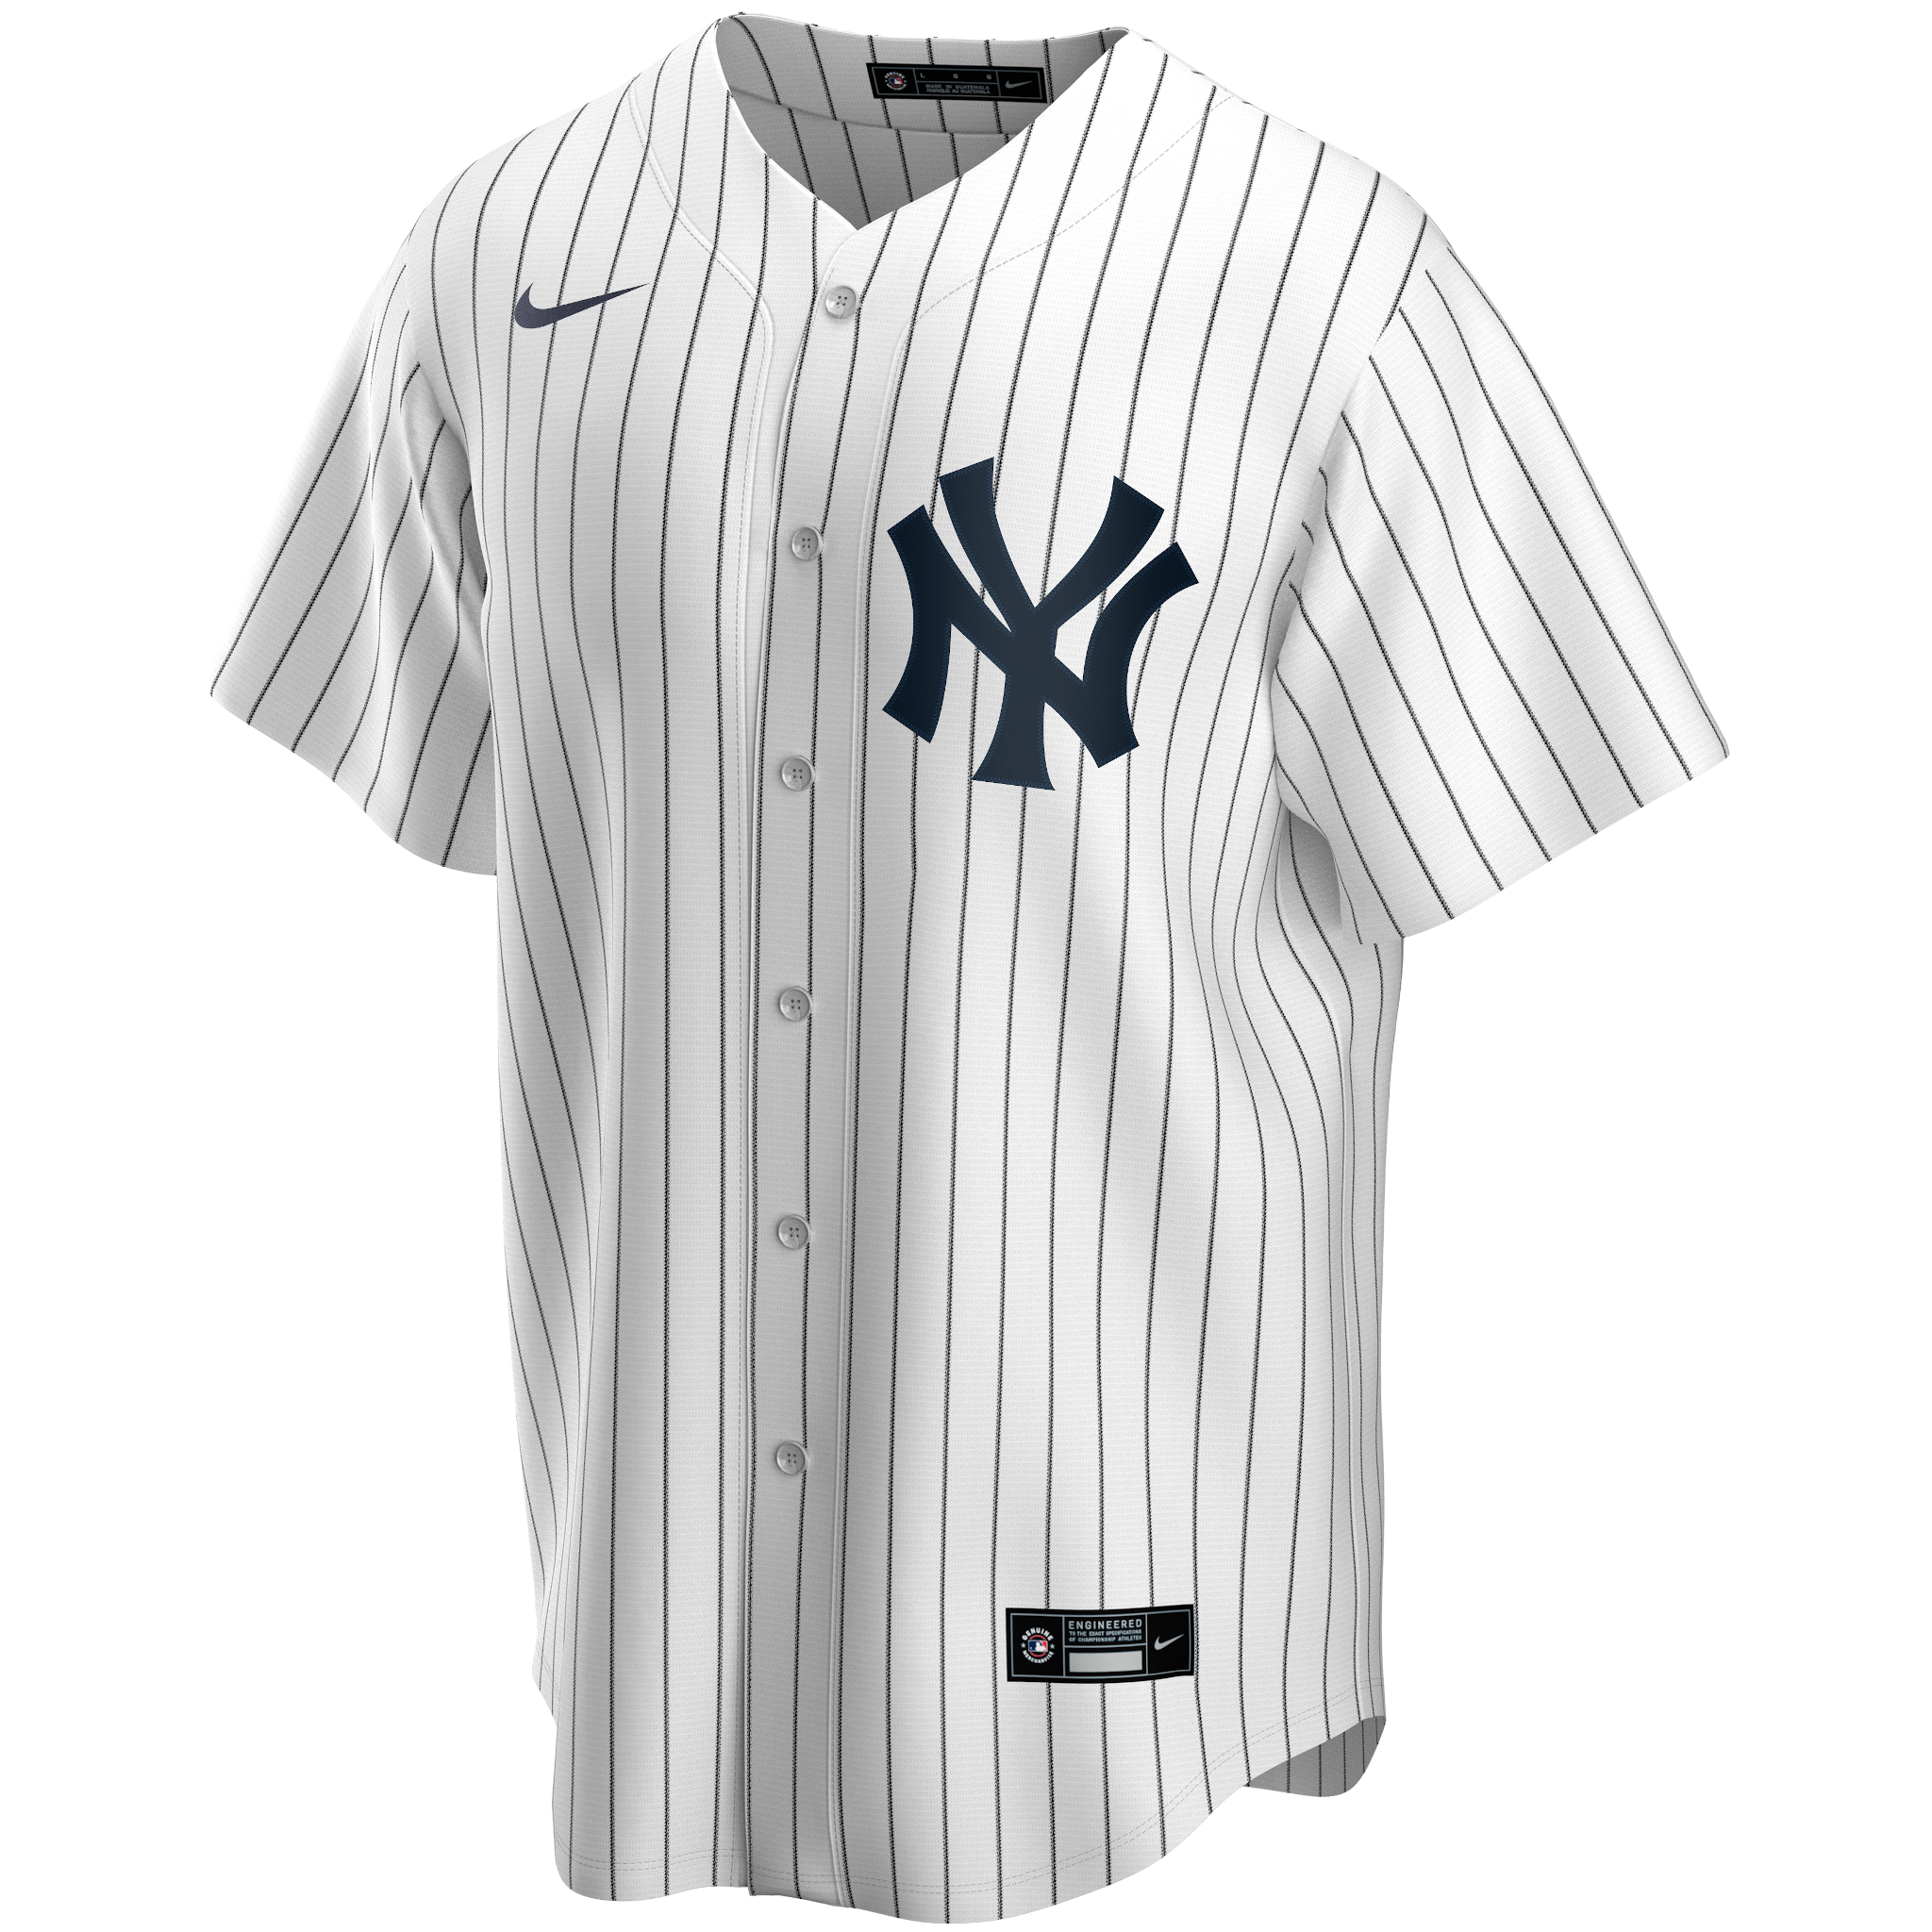 Yankees will have names on the back of their jerseys for the first